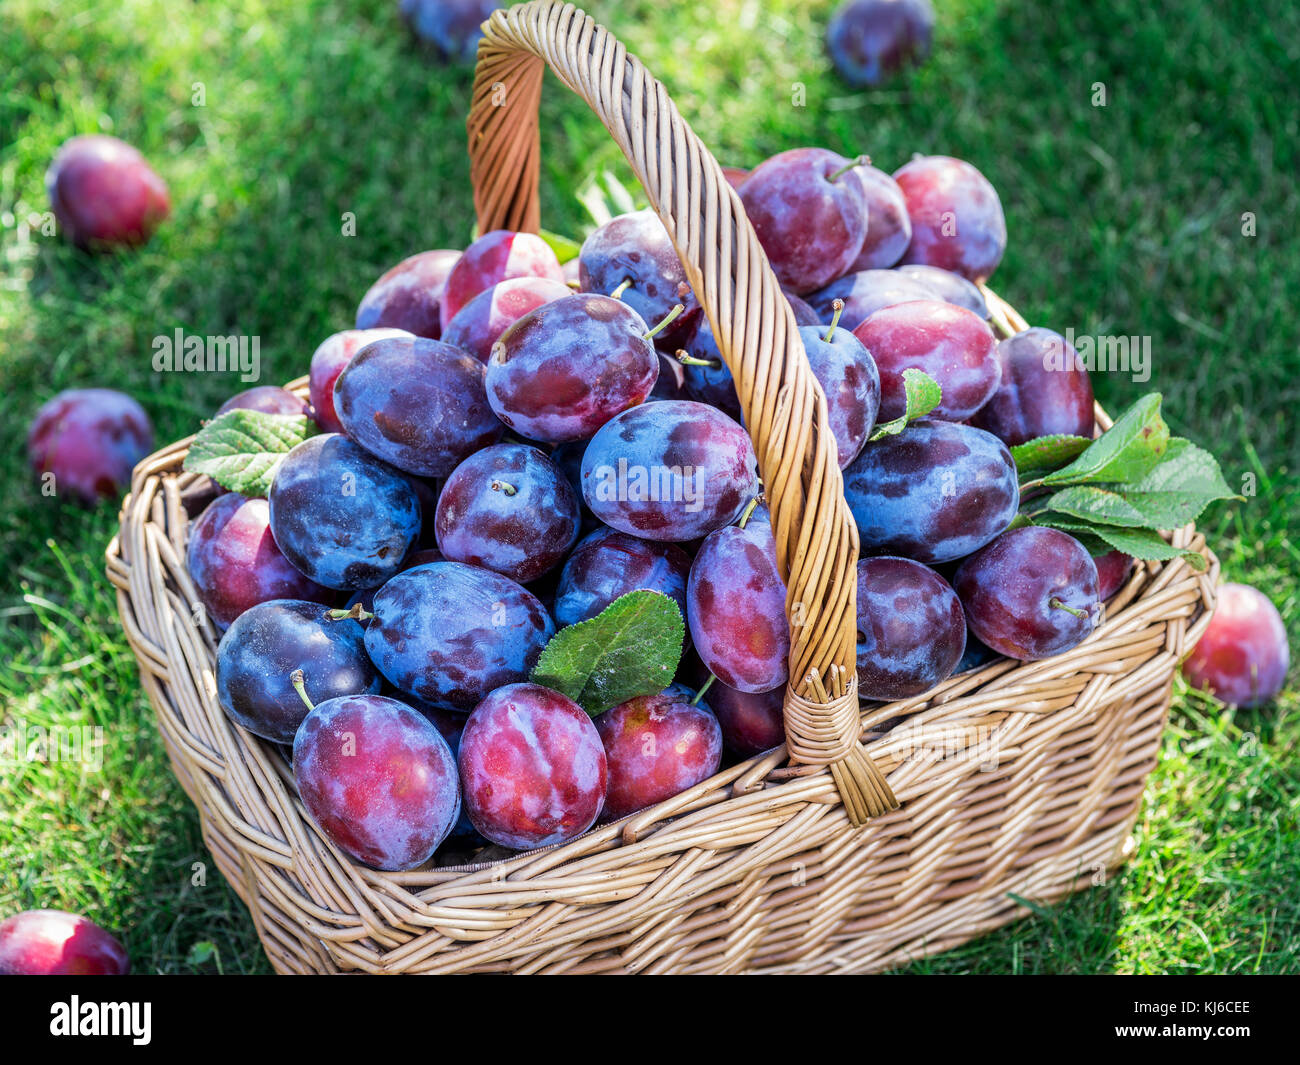 Plum harvest. Plums in the basket on the green grass. Stock Photo